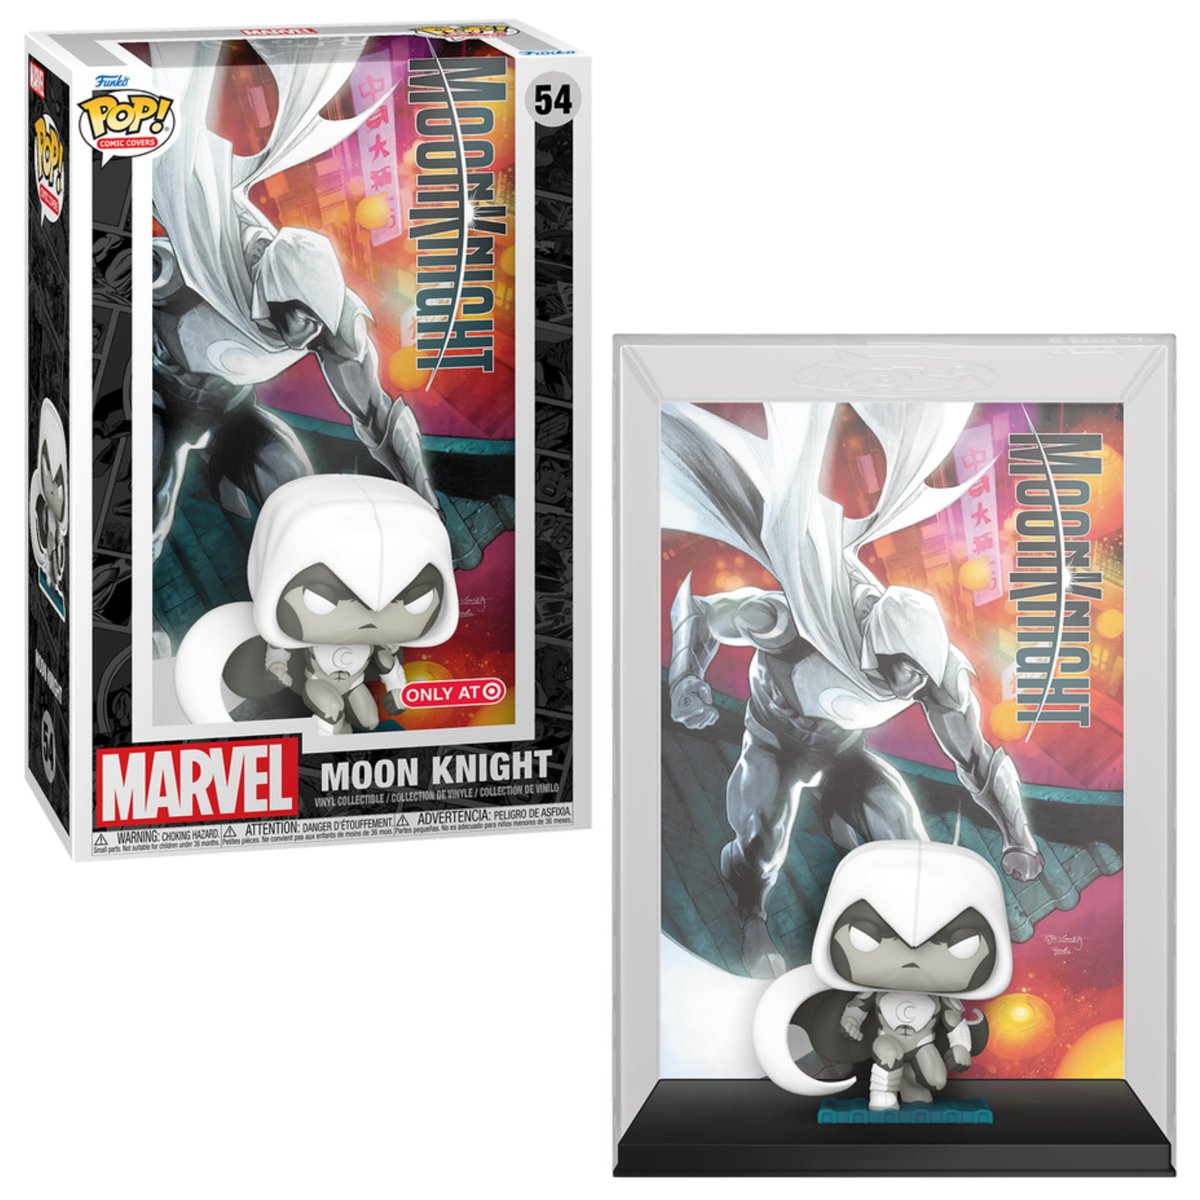 Full glams for the new Moon Knight Funko POP! Comic Cover ~ dropping at the link below 4/29 6AM PT! Stay tuned ~ thanks @funkoinfo_ ~
Linky ~ fnkpp.com/TS
#Ad #MoonKnight #FPN #FunkoPOPNews #Funko #POP #Funkos #POPVinyl #FunkoPOP #FunkoPOPs #FunkoSoda